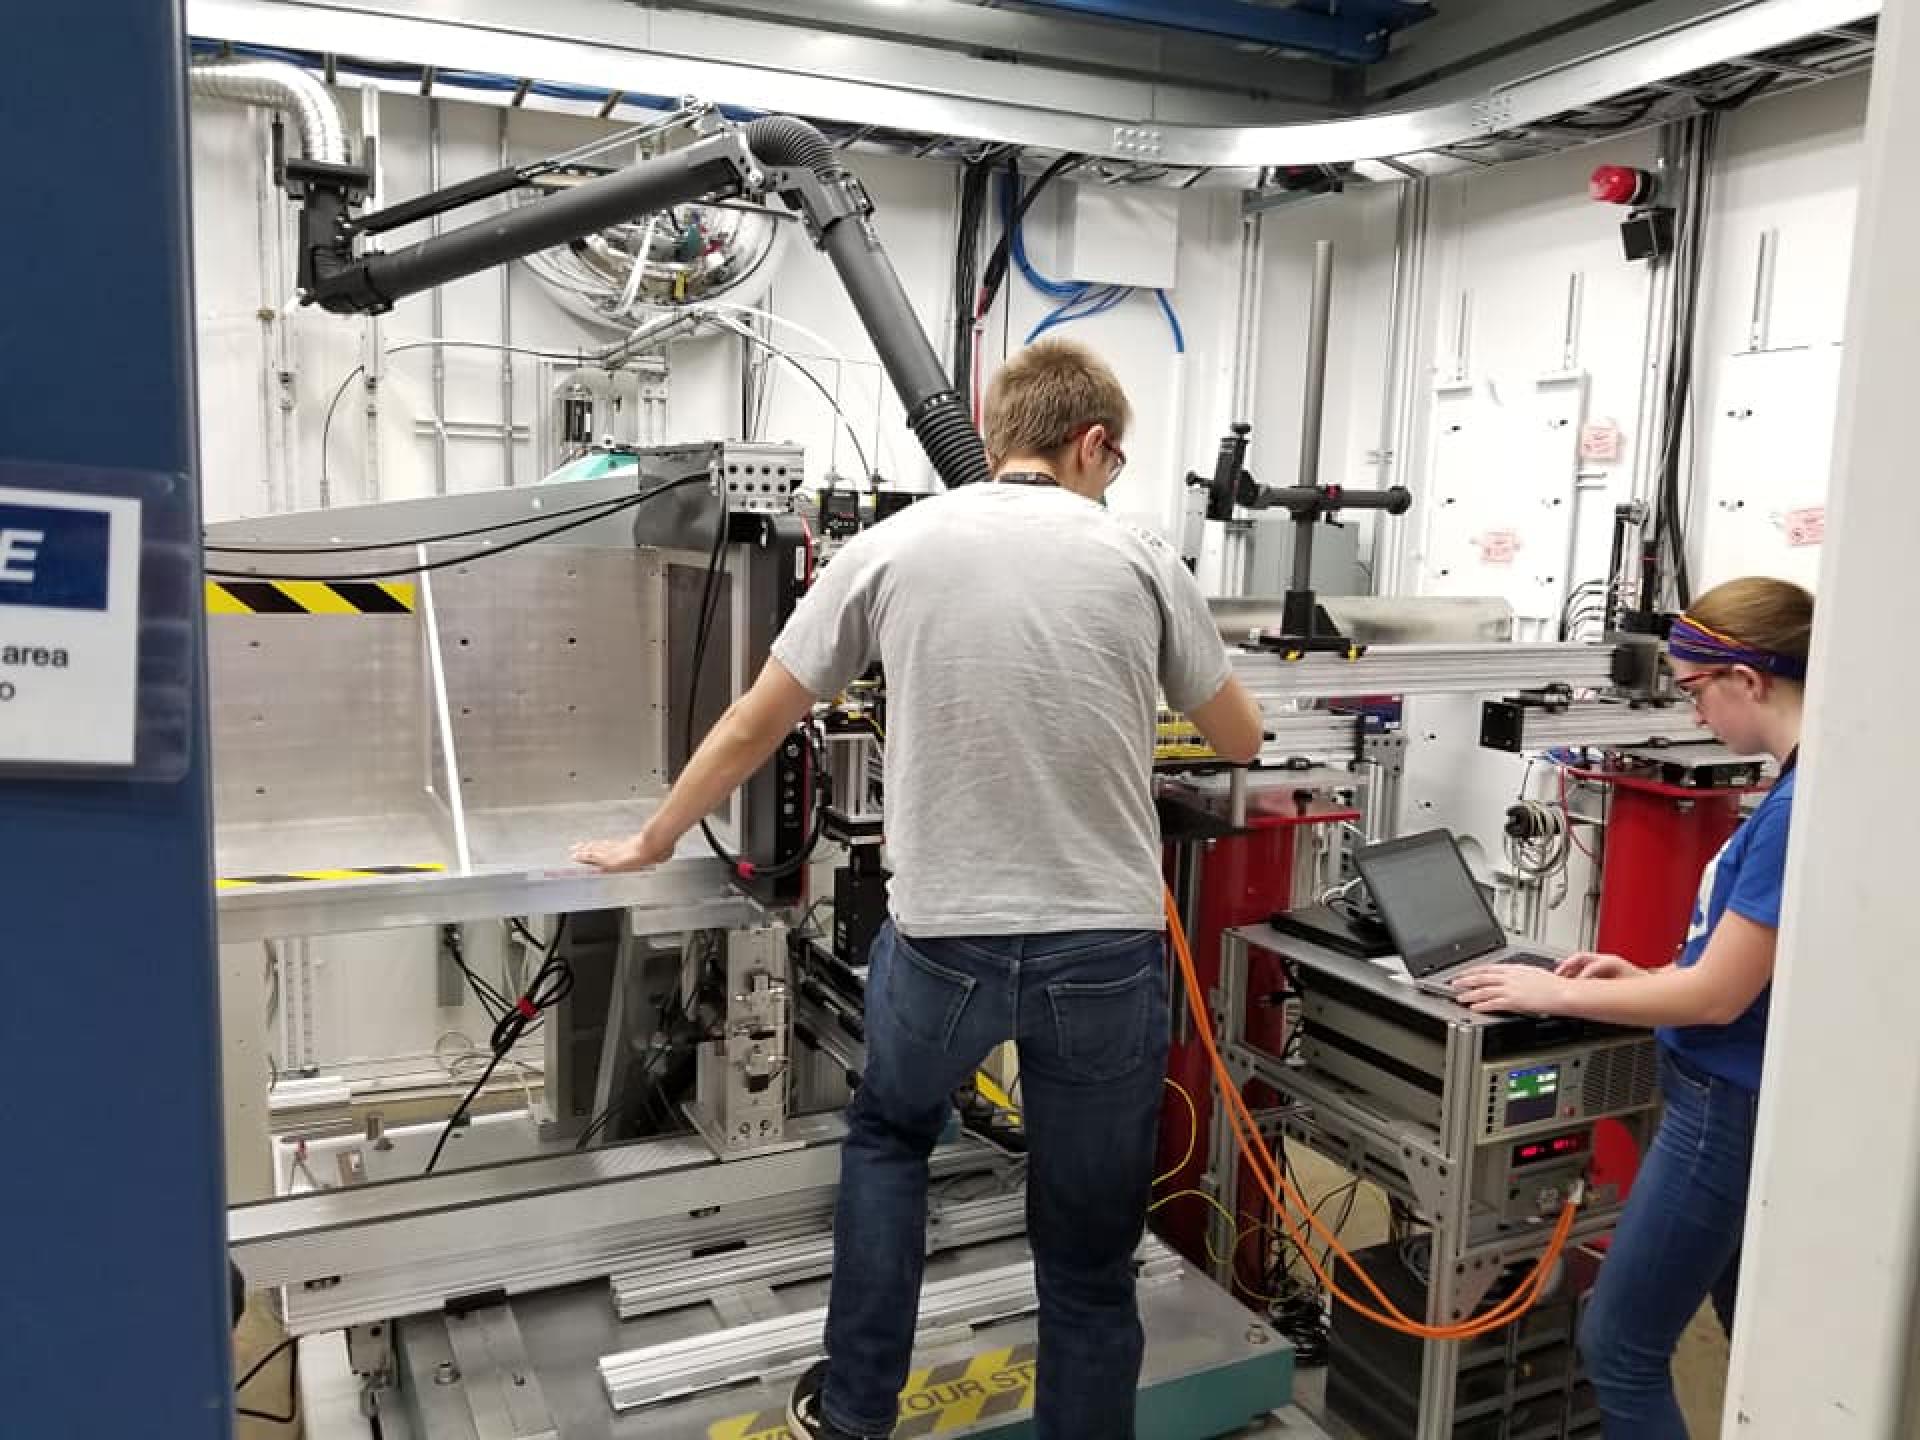 Samuel Lee and Morgan Fellows replace ionic liquid samples on the X-ray instrument.